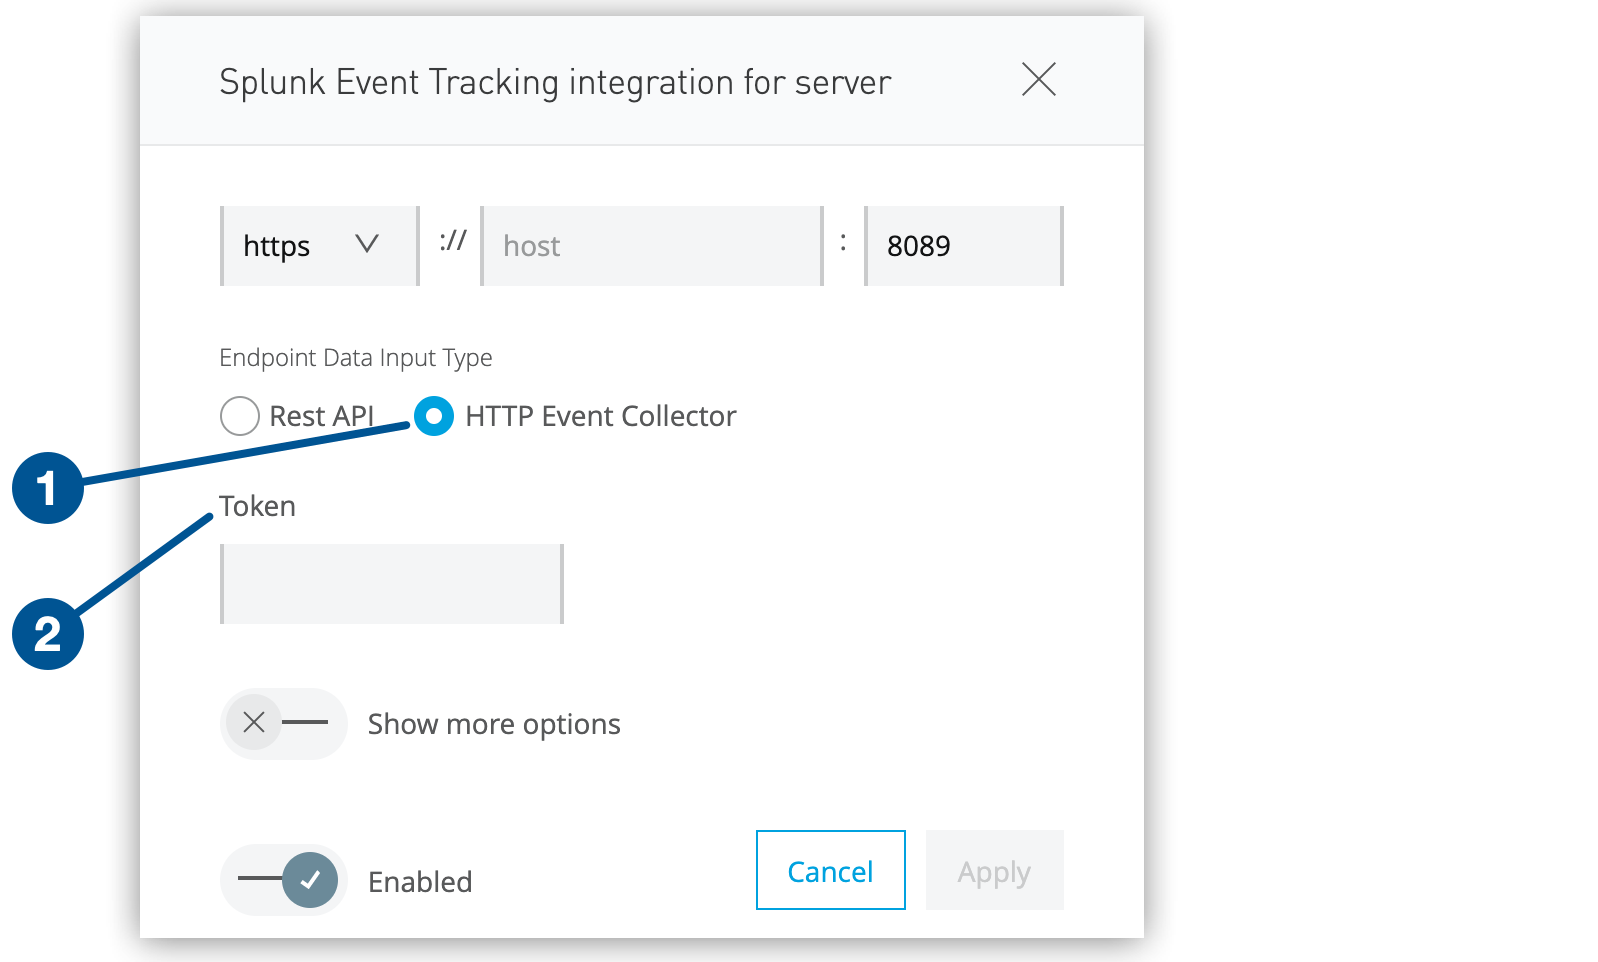 HTTP Event Collector option and Token field in the Splunk configuration window